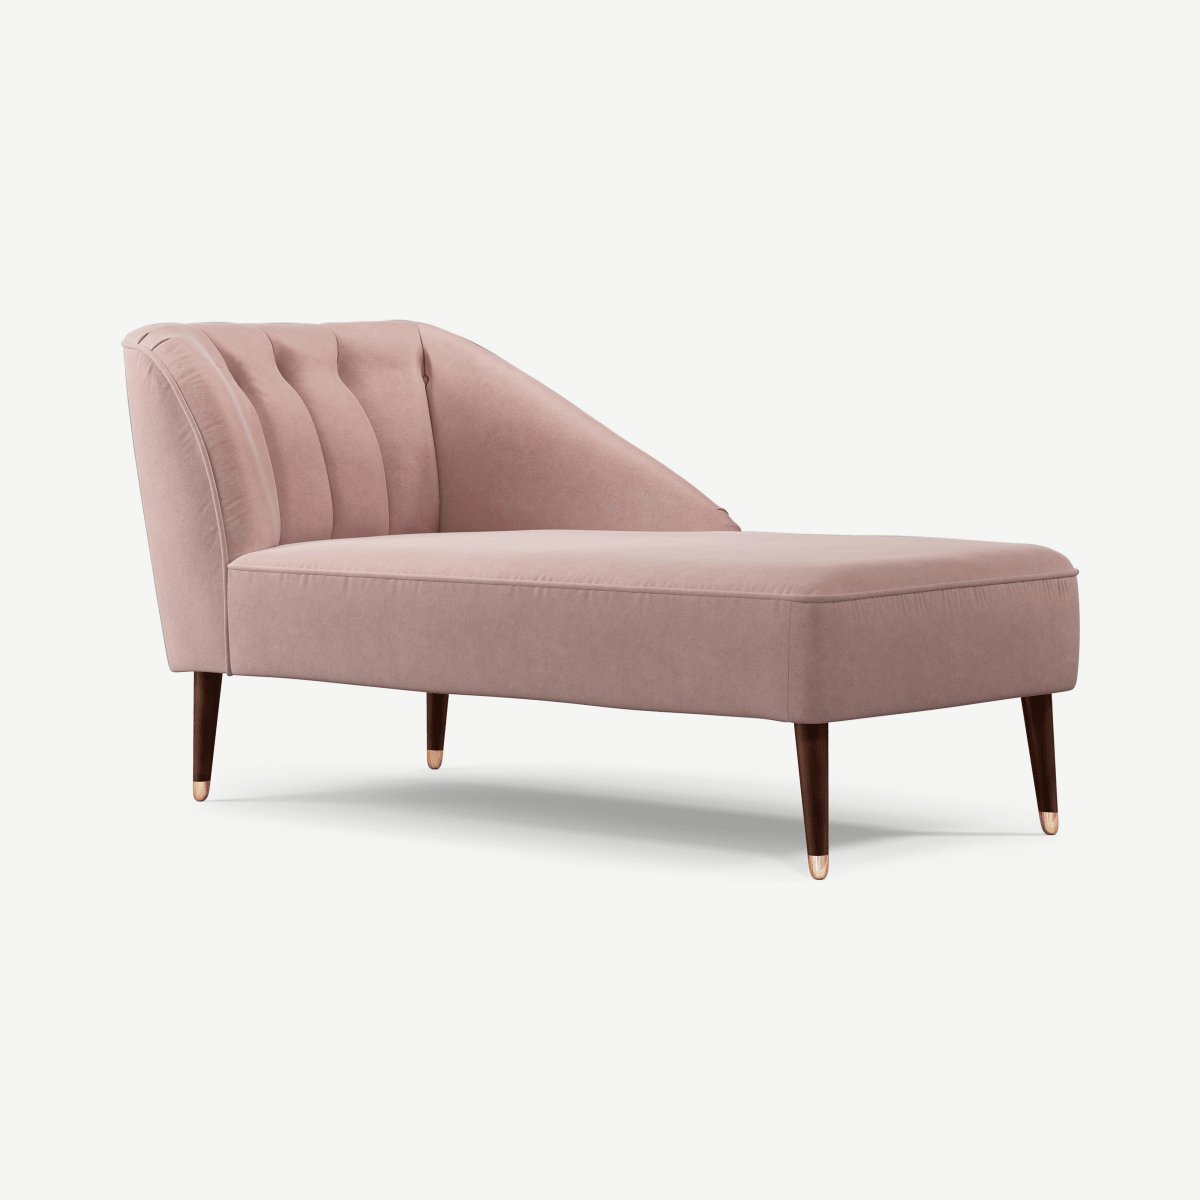 Margot Right Hand Facing Chaise Longue, Pink Cotton Velvet with Dark Wood Copper Legs